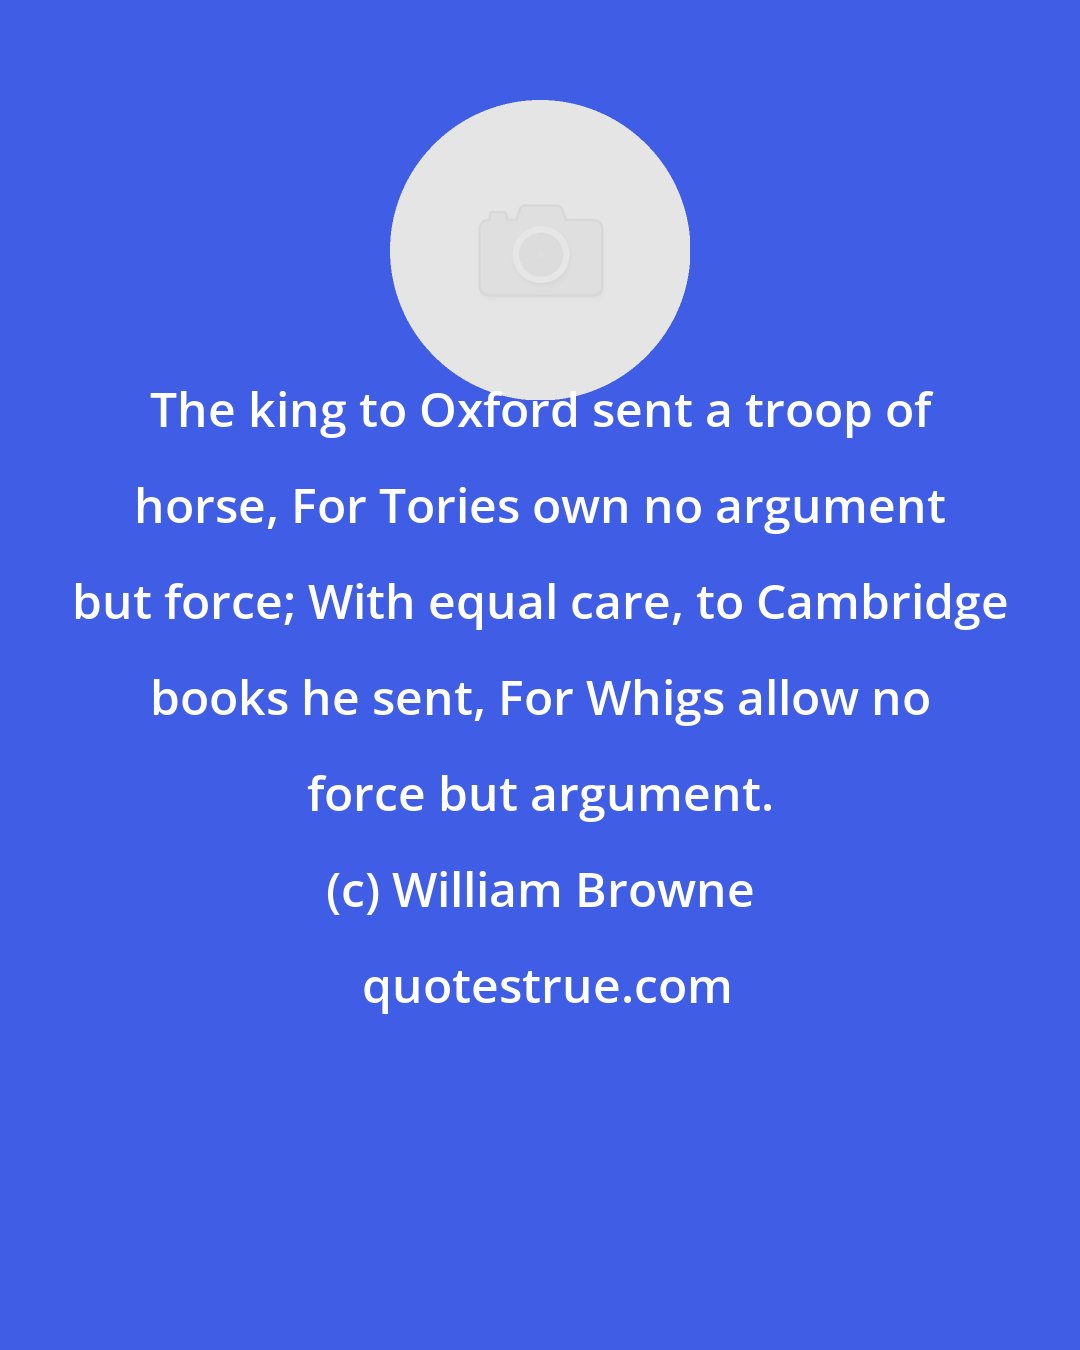 William Browne: The king to Oxford sent a troop of horse, For Tories own no argument but force; With equal care, to Cambridge books he sent, For Whigs allow no force but argument.